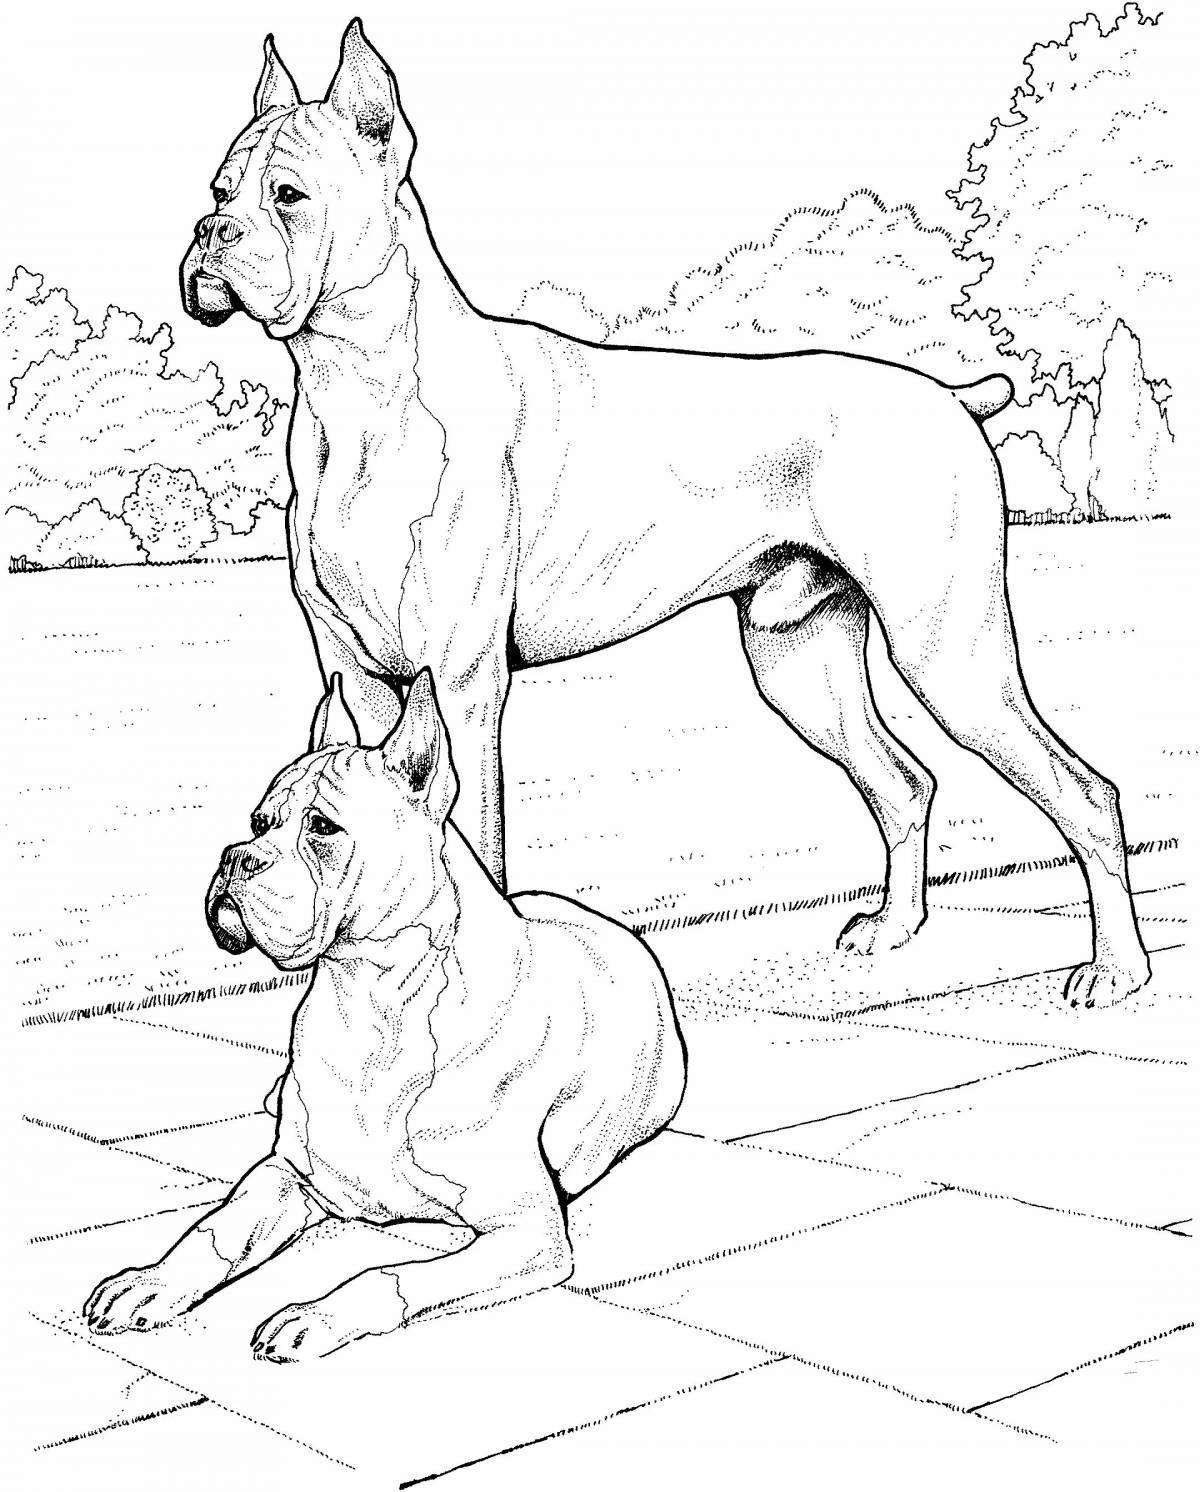 Coloring page energetic boxer